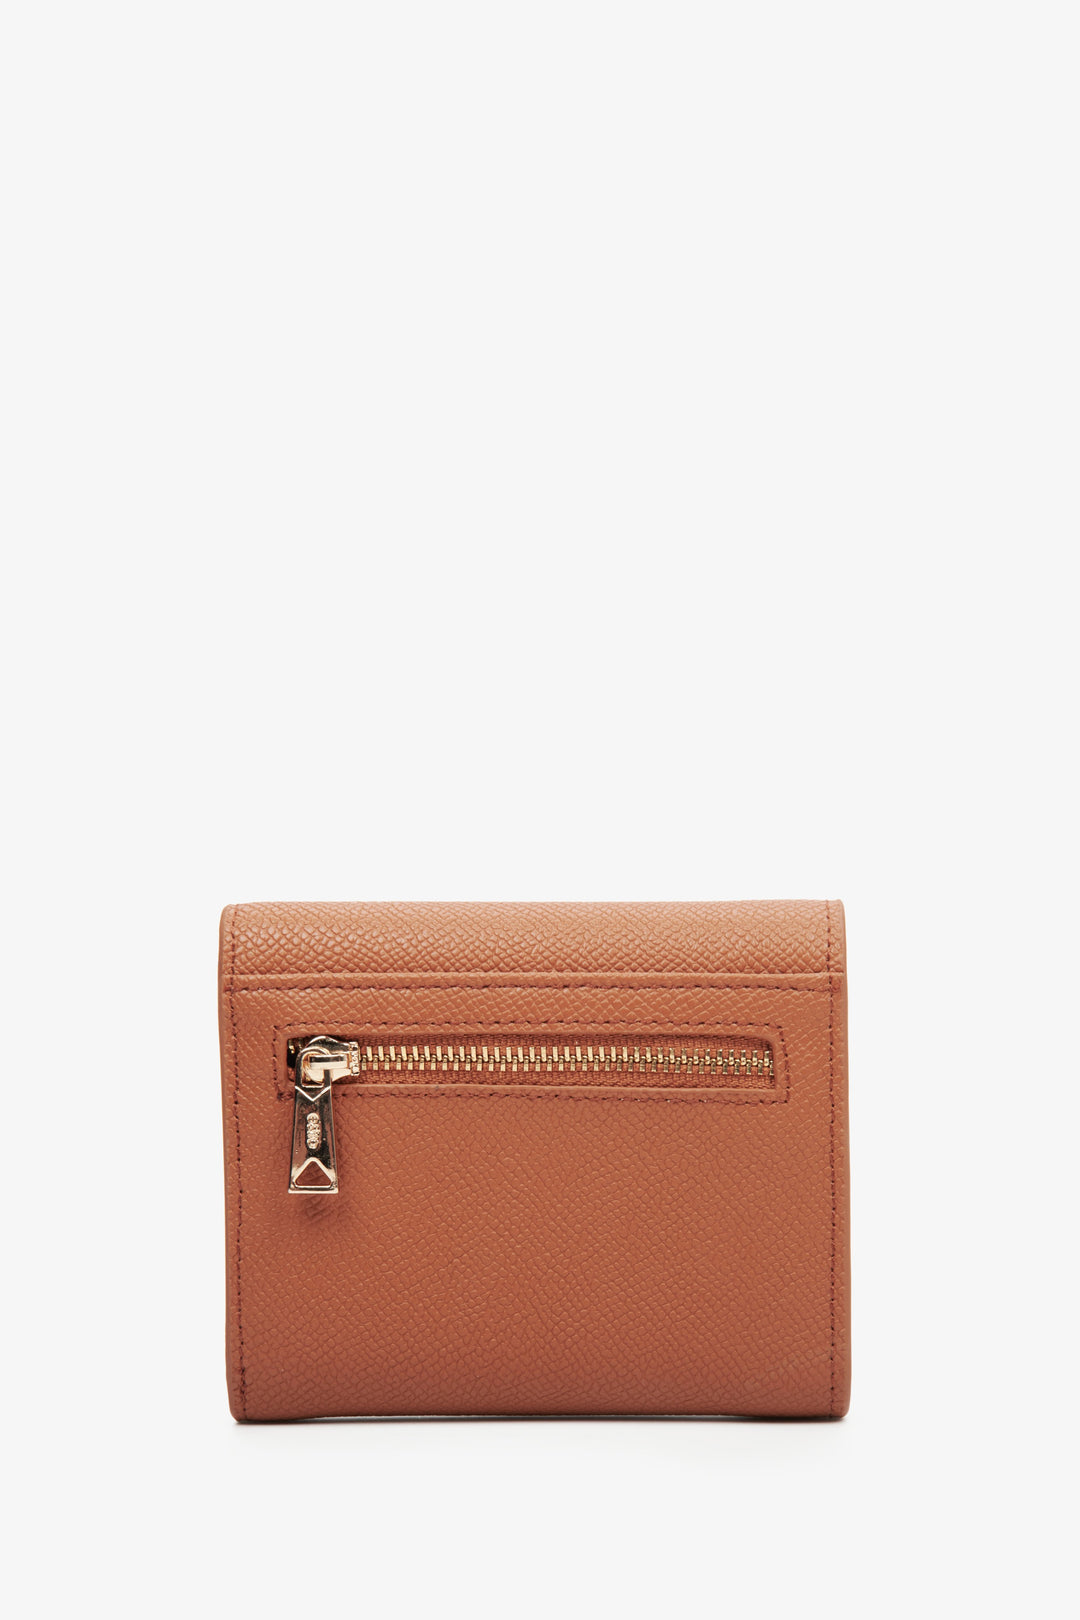 Estro women's leather wallet in brown with a gold clasp and accents - reverse side.